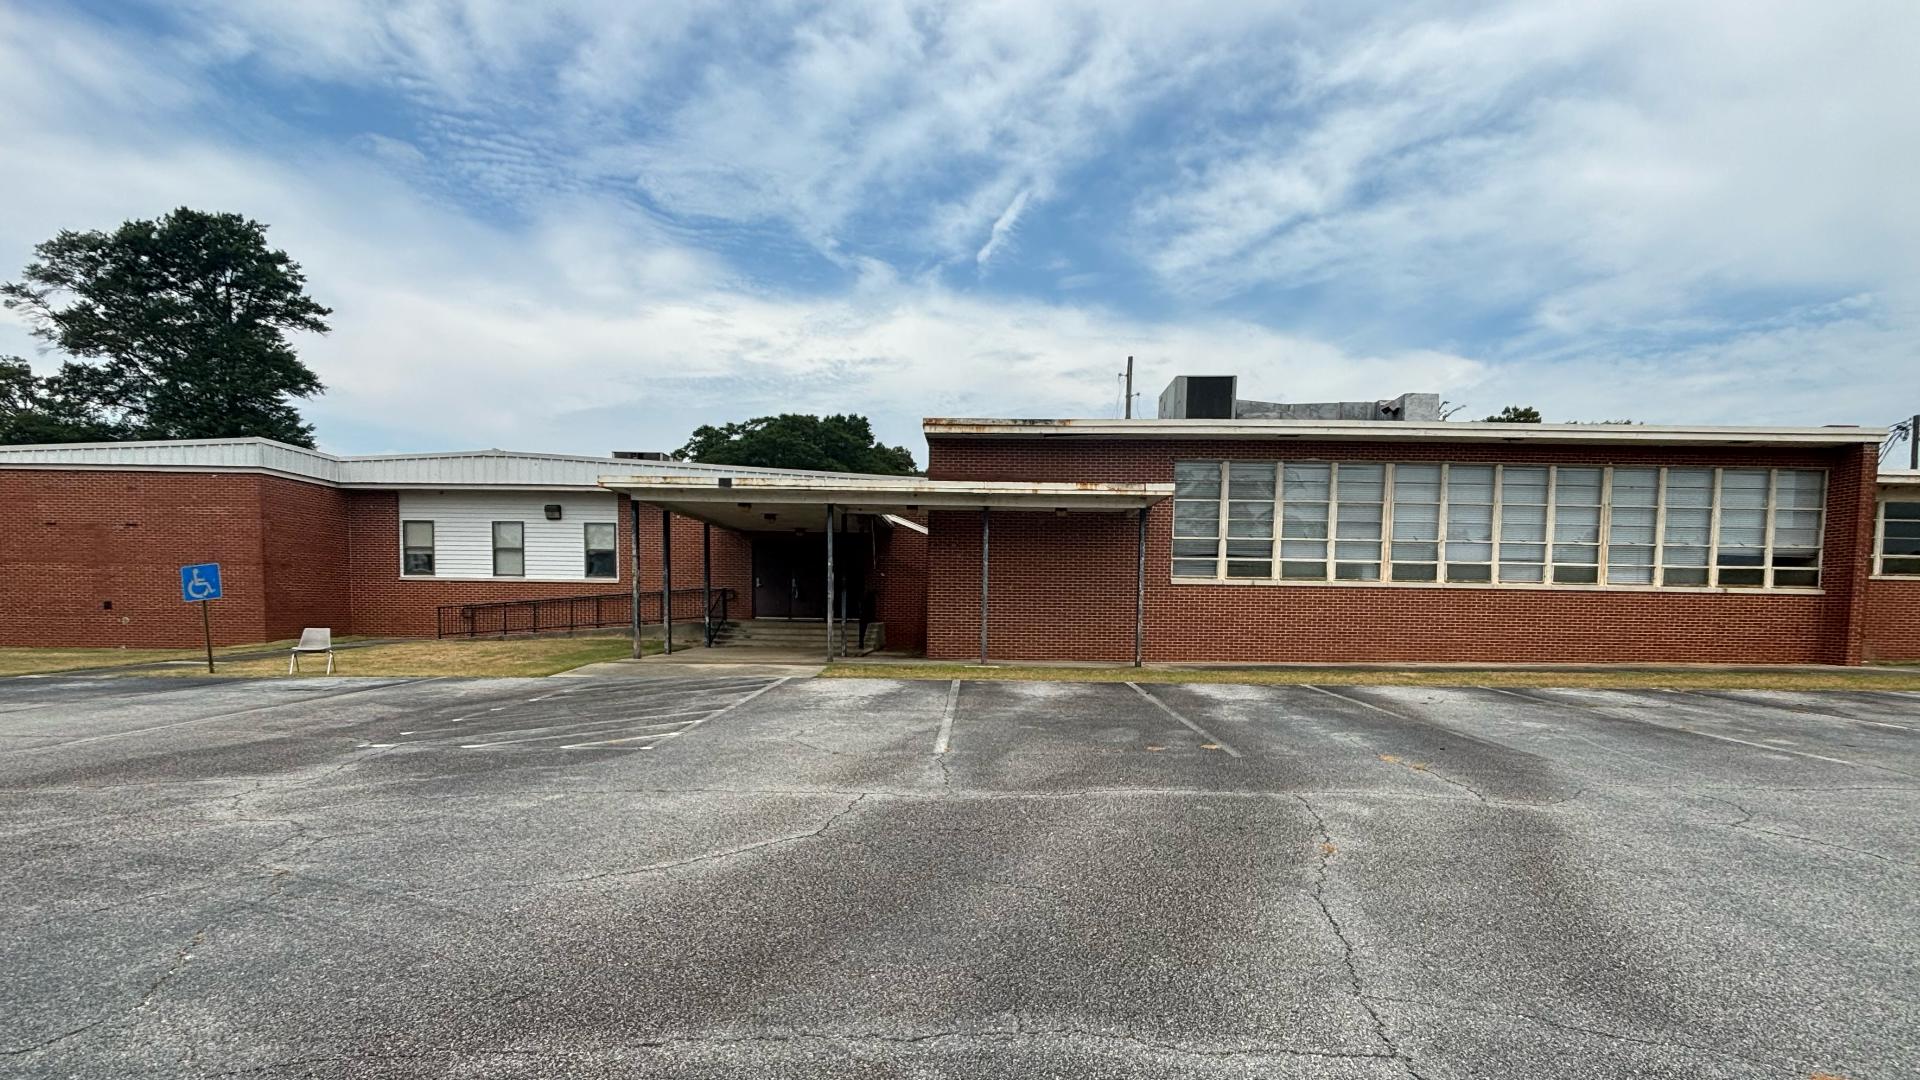 The old Byron Elementary School is facing demolition to welcome new skatepark.